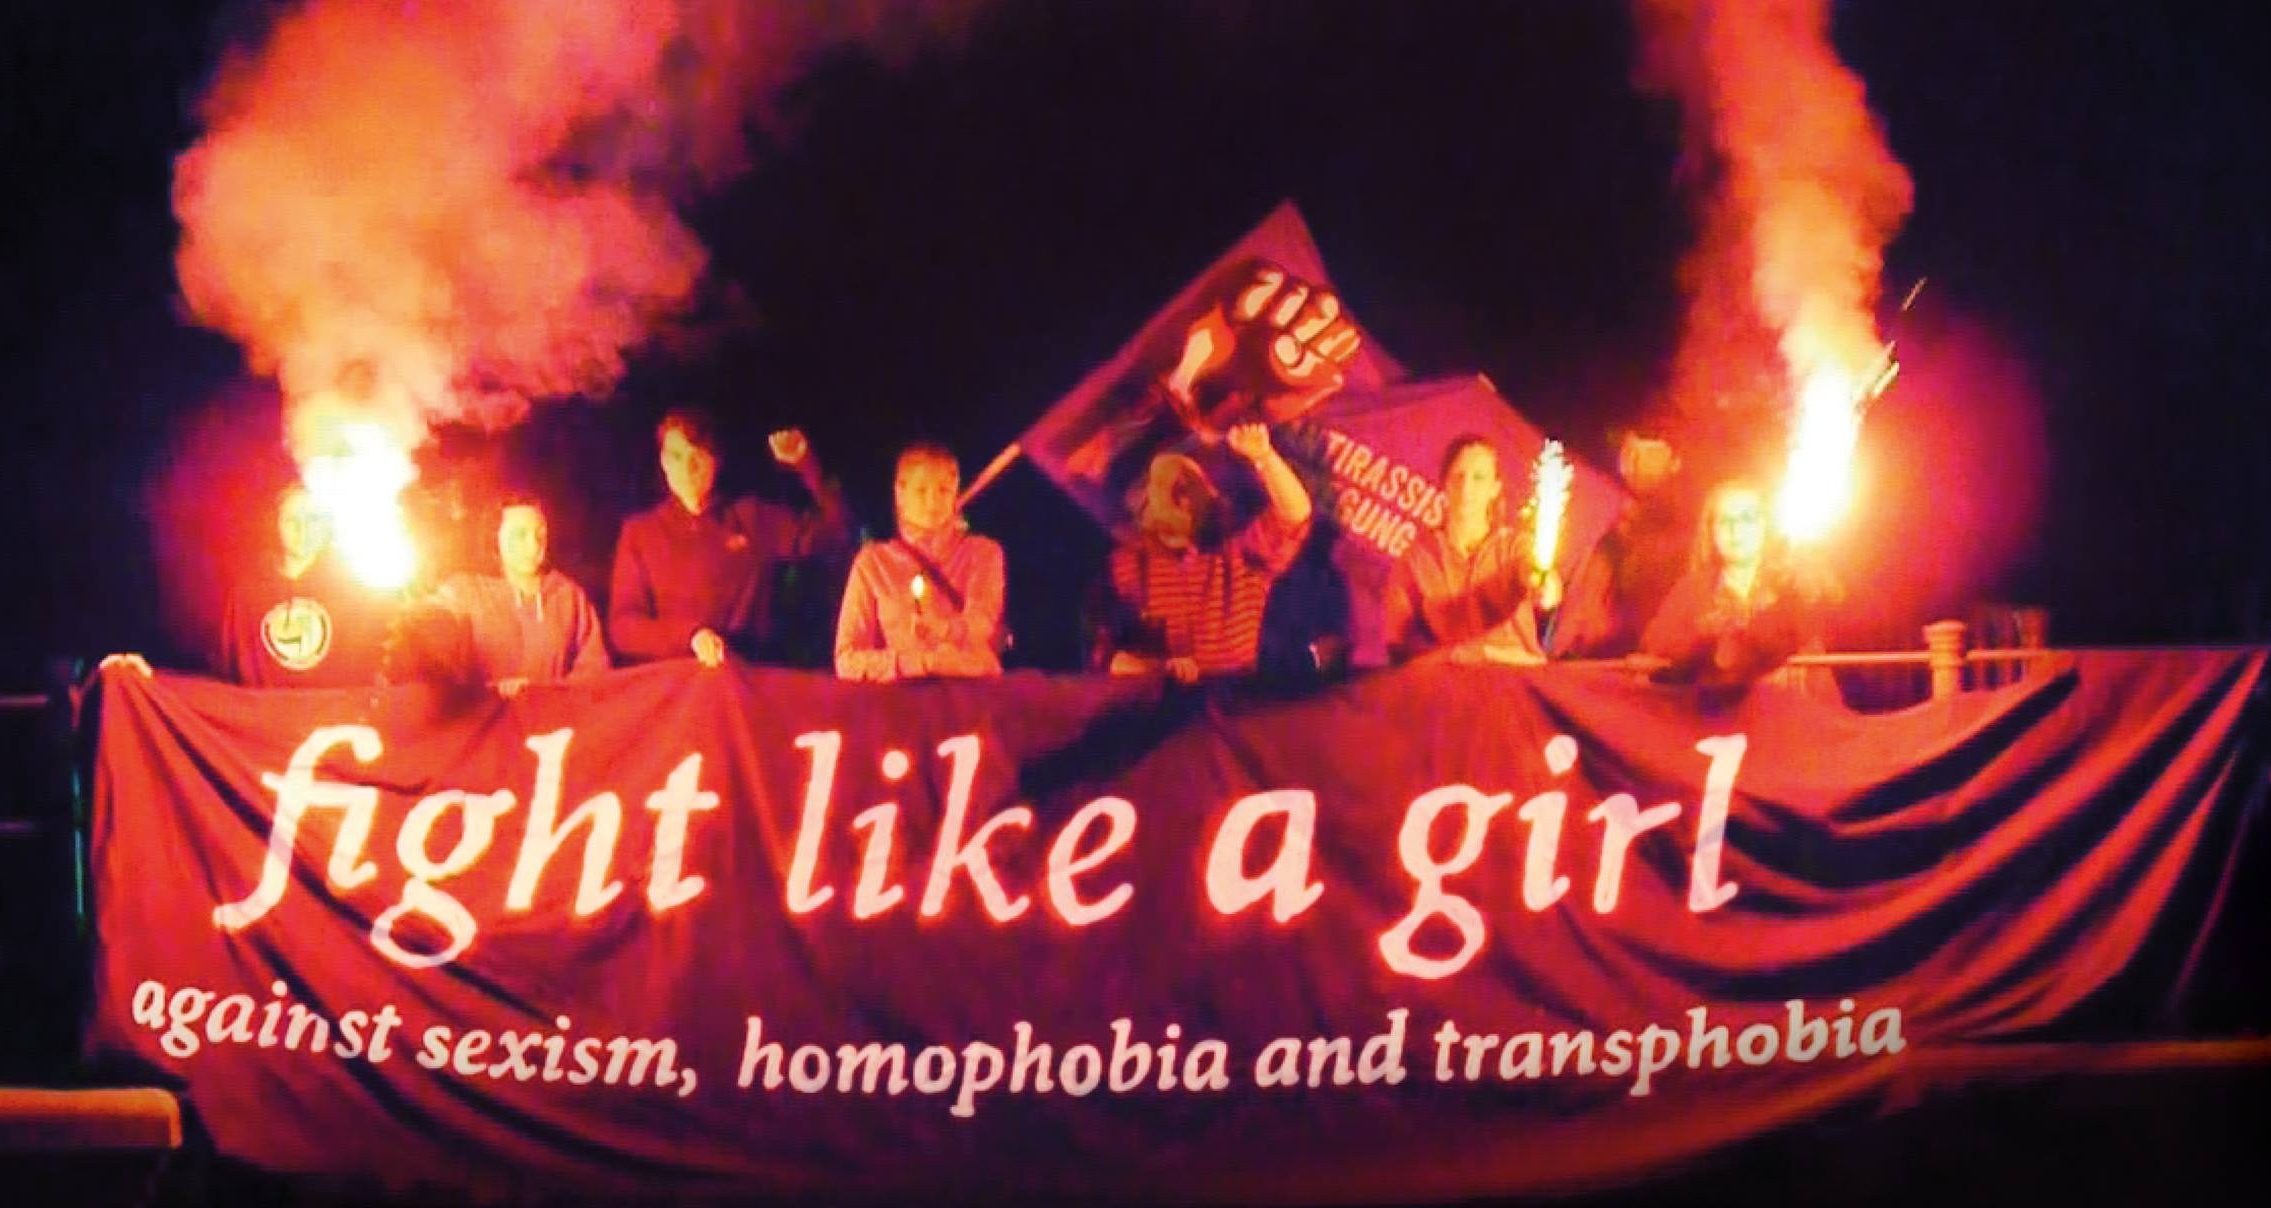 [Video] Fight like a girl against sexism, homophobia and transphobia